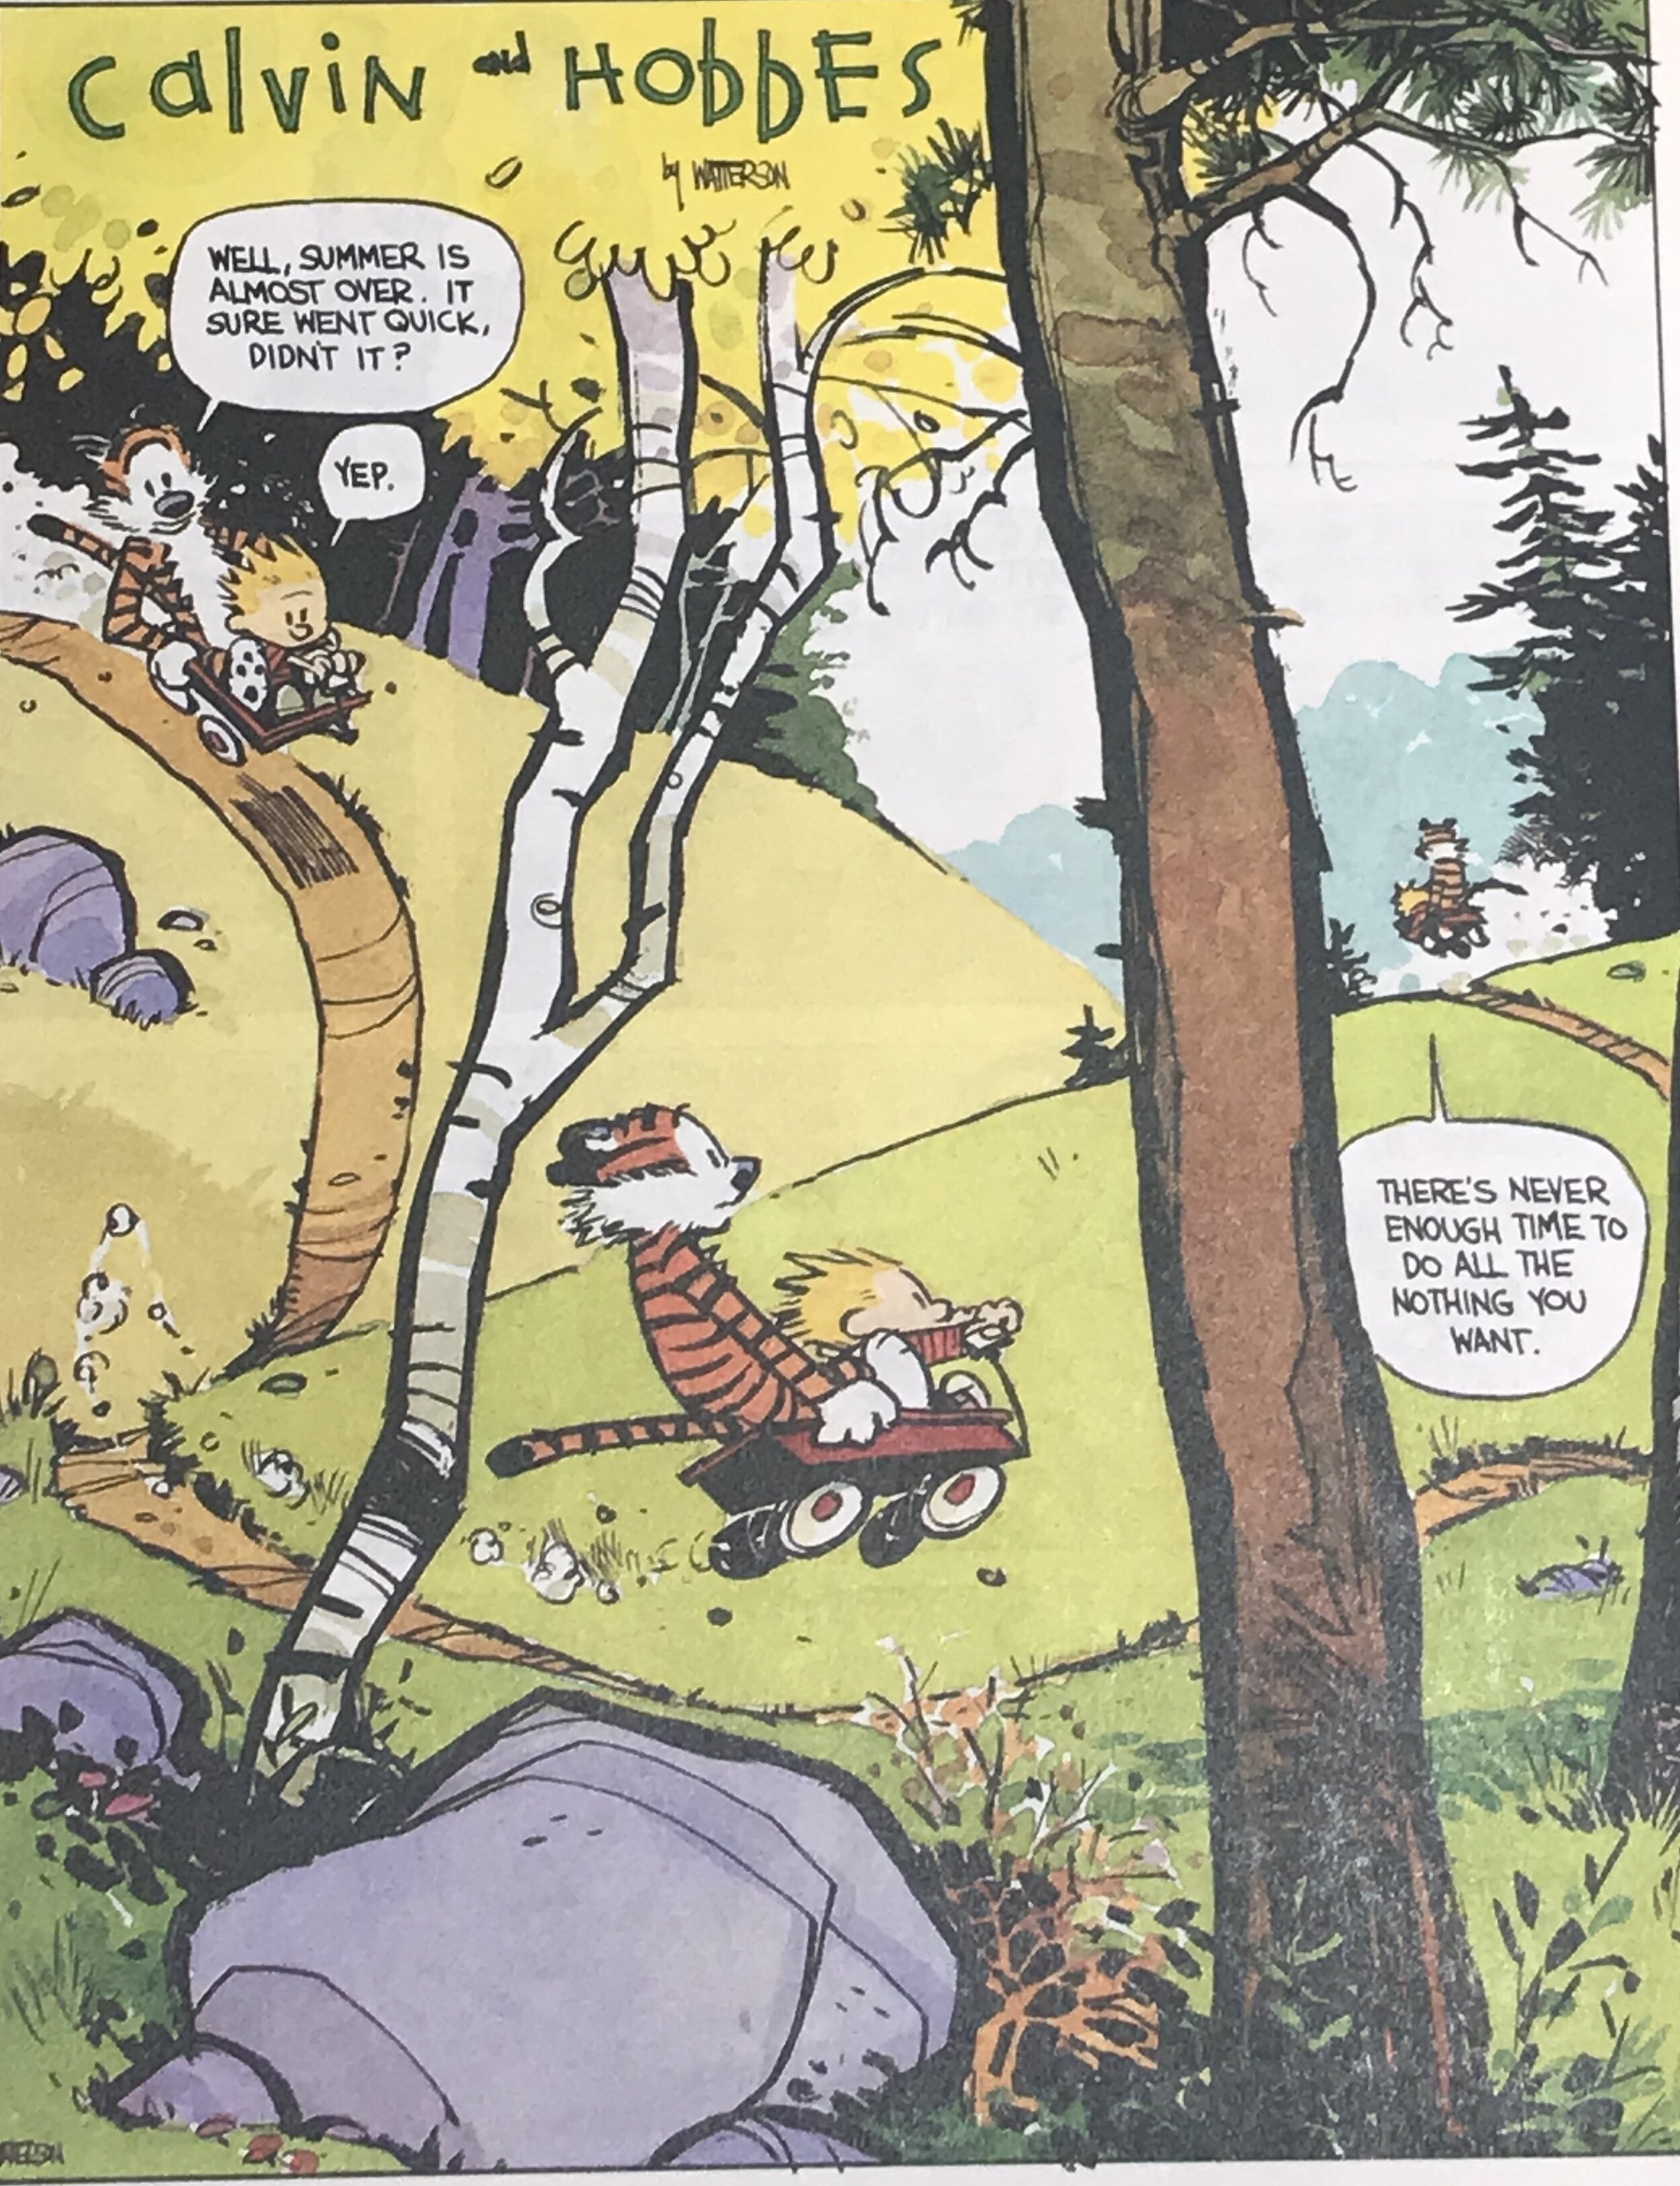 Calvin and Hobbes Lazy Sunday Excerpt3.jpg